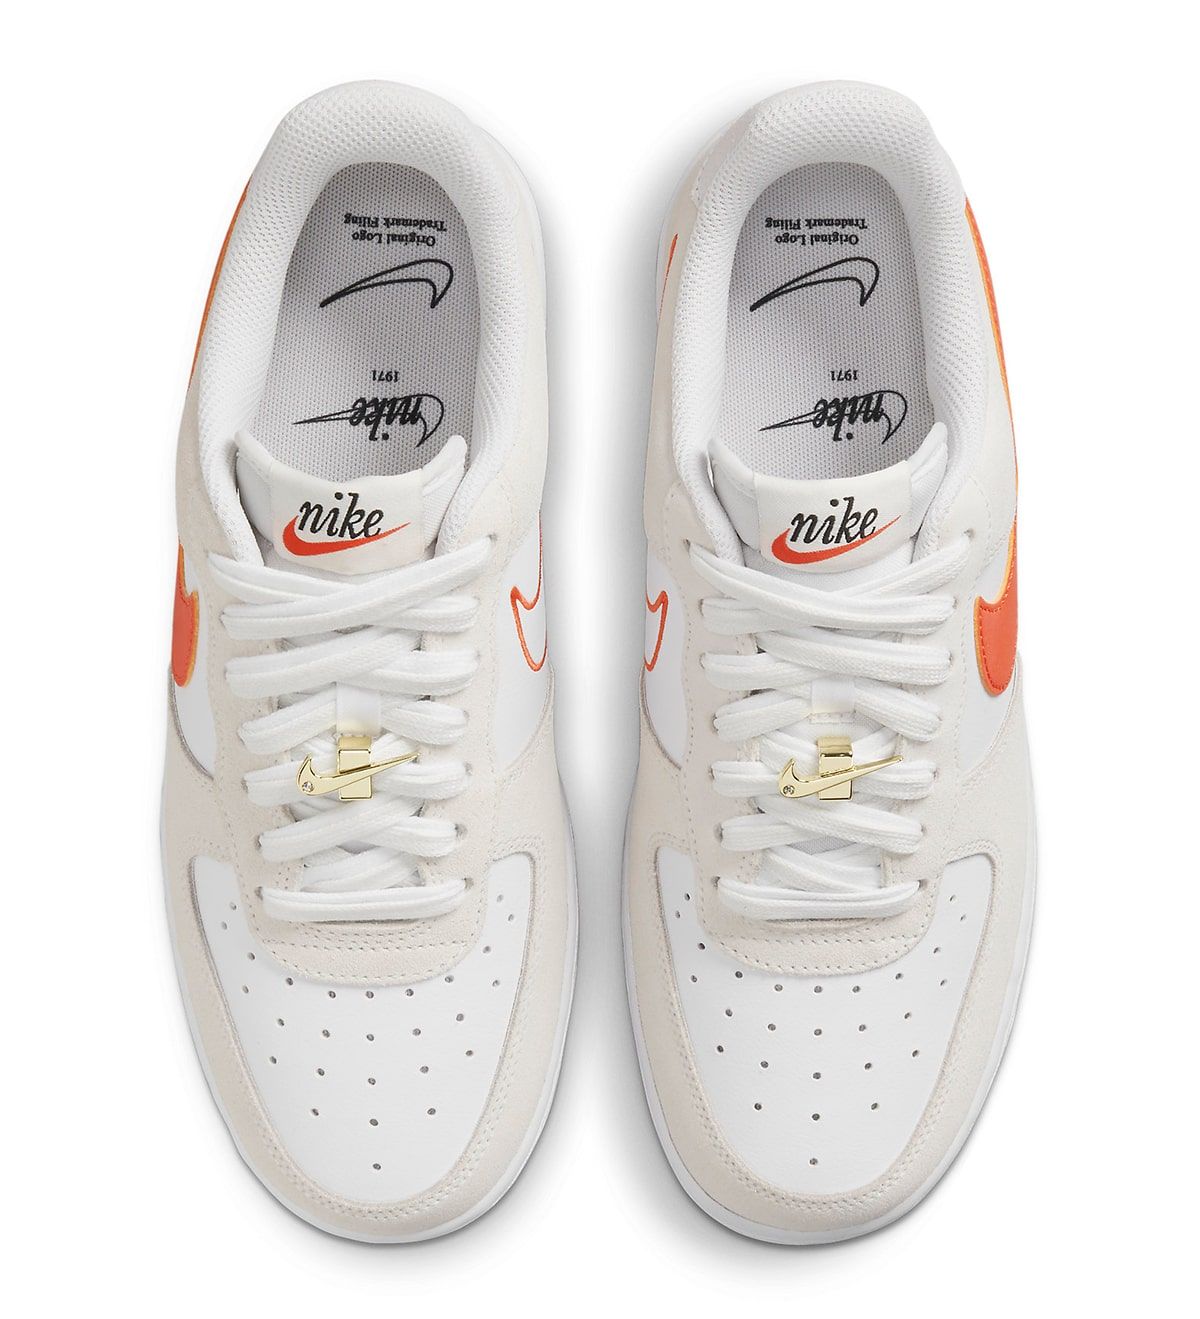 Available Now // Air Force 1 Low “First Use” in Sail/Orange | House of Heat°